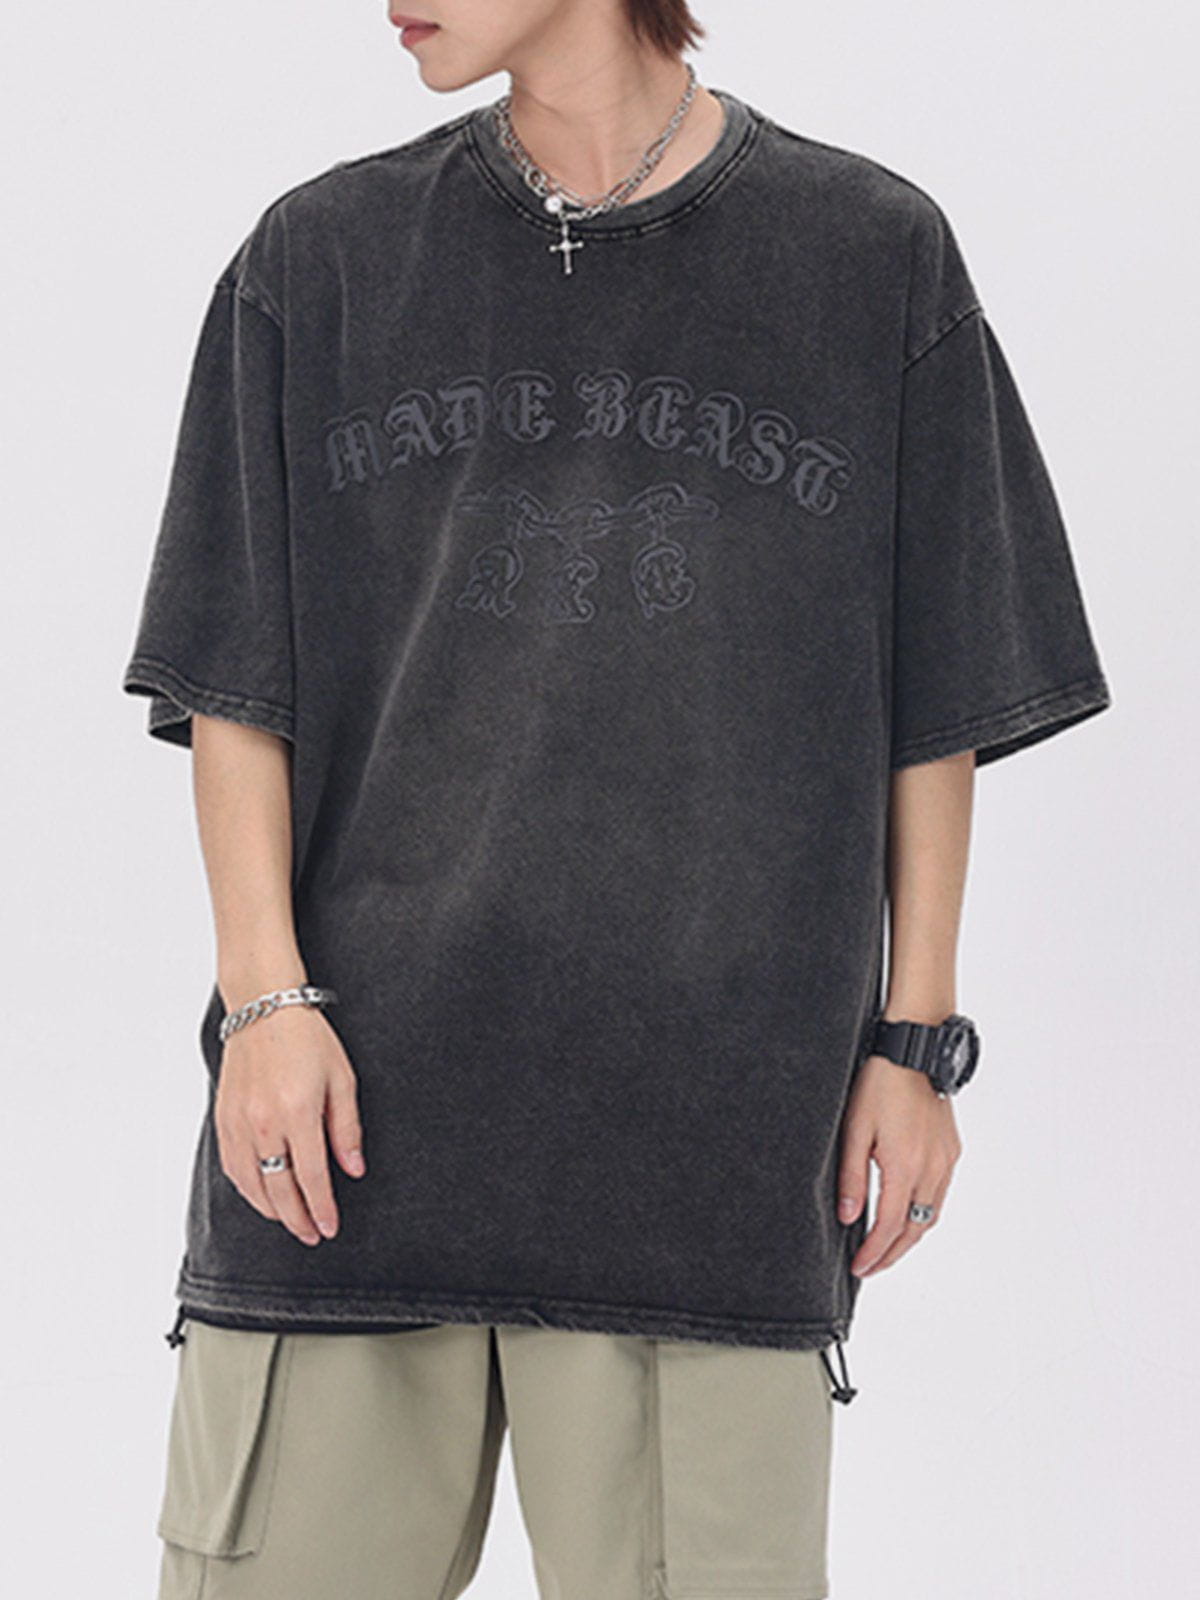 Sneakerland™ - Gothic Vintage Washed Tee